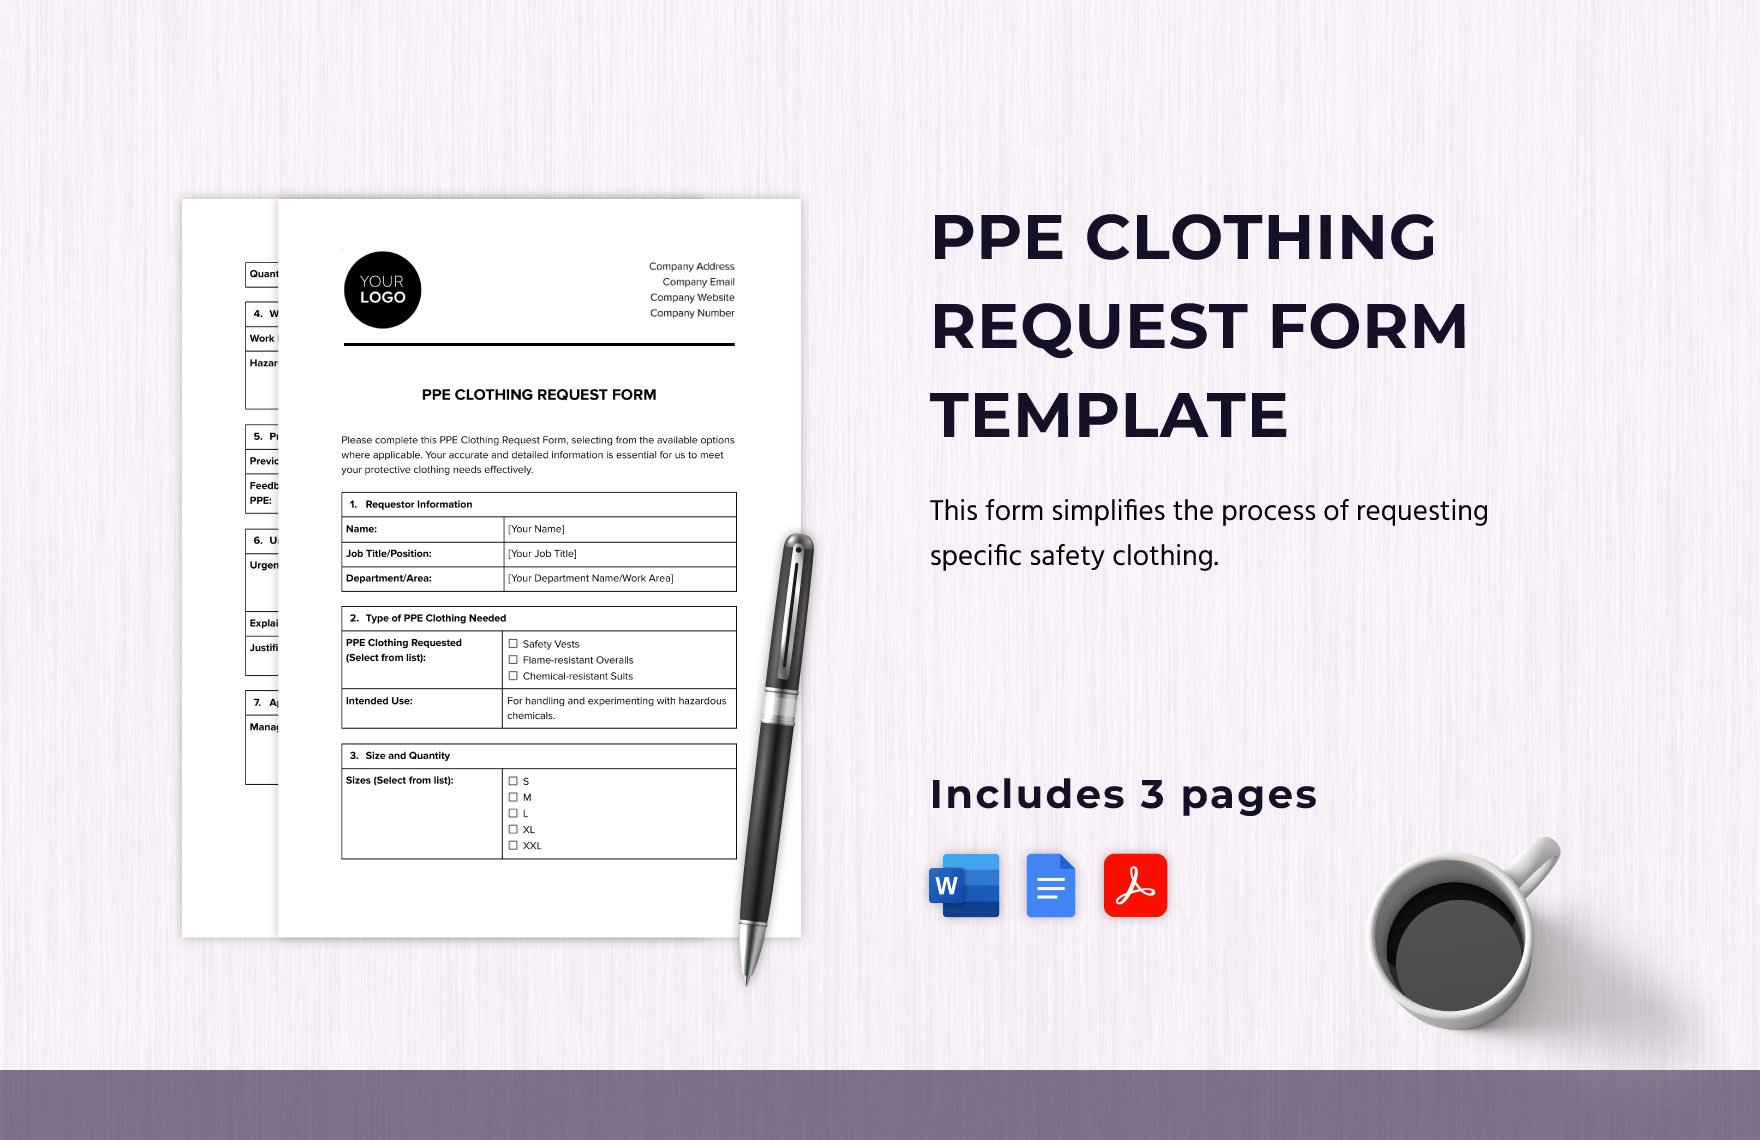 PPE Clothing Request Form Template